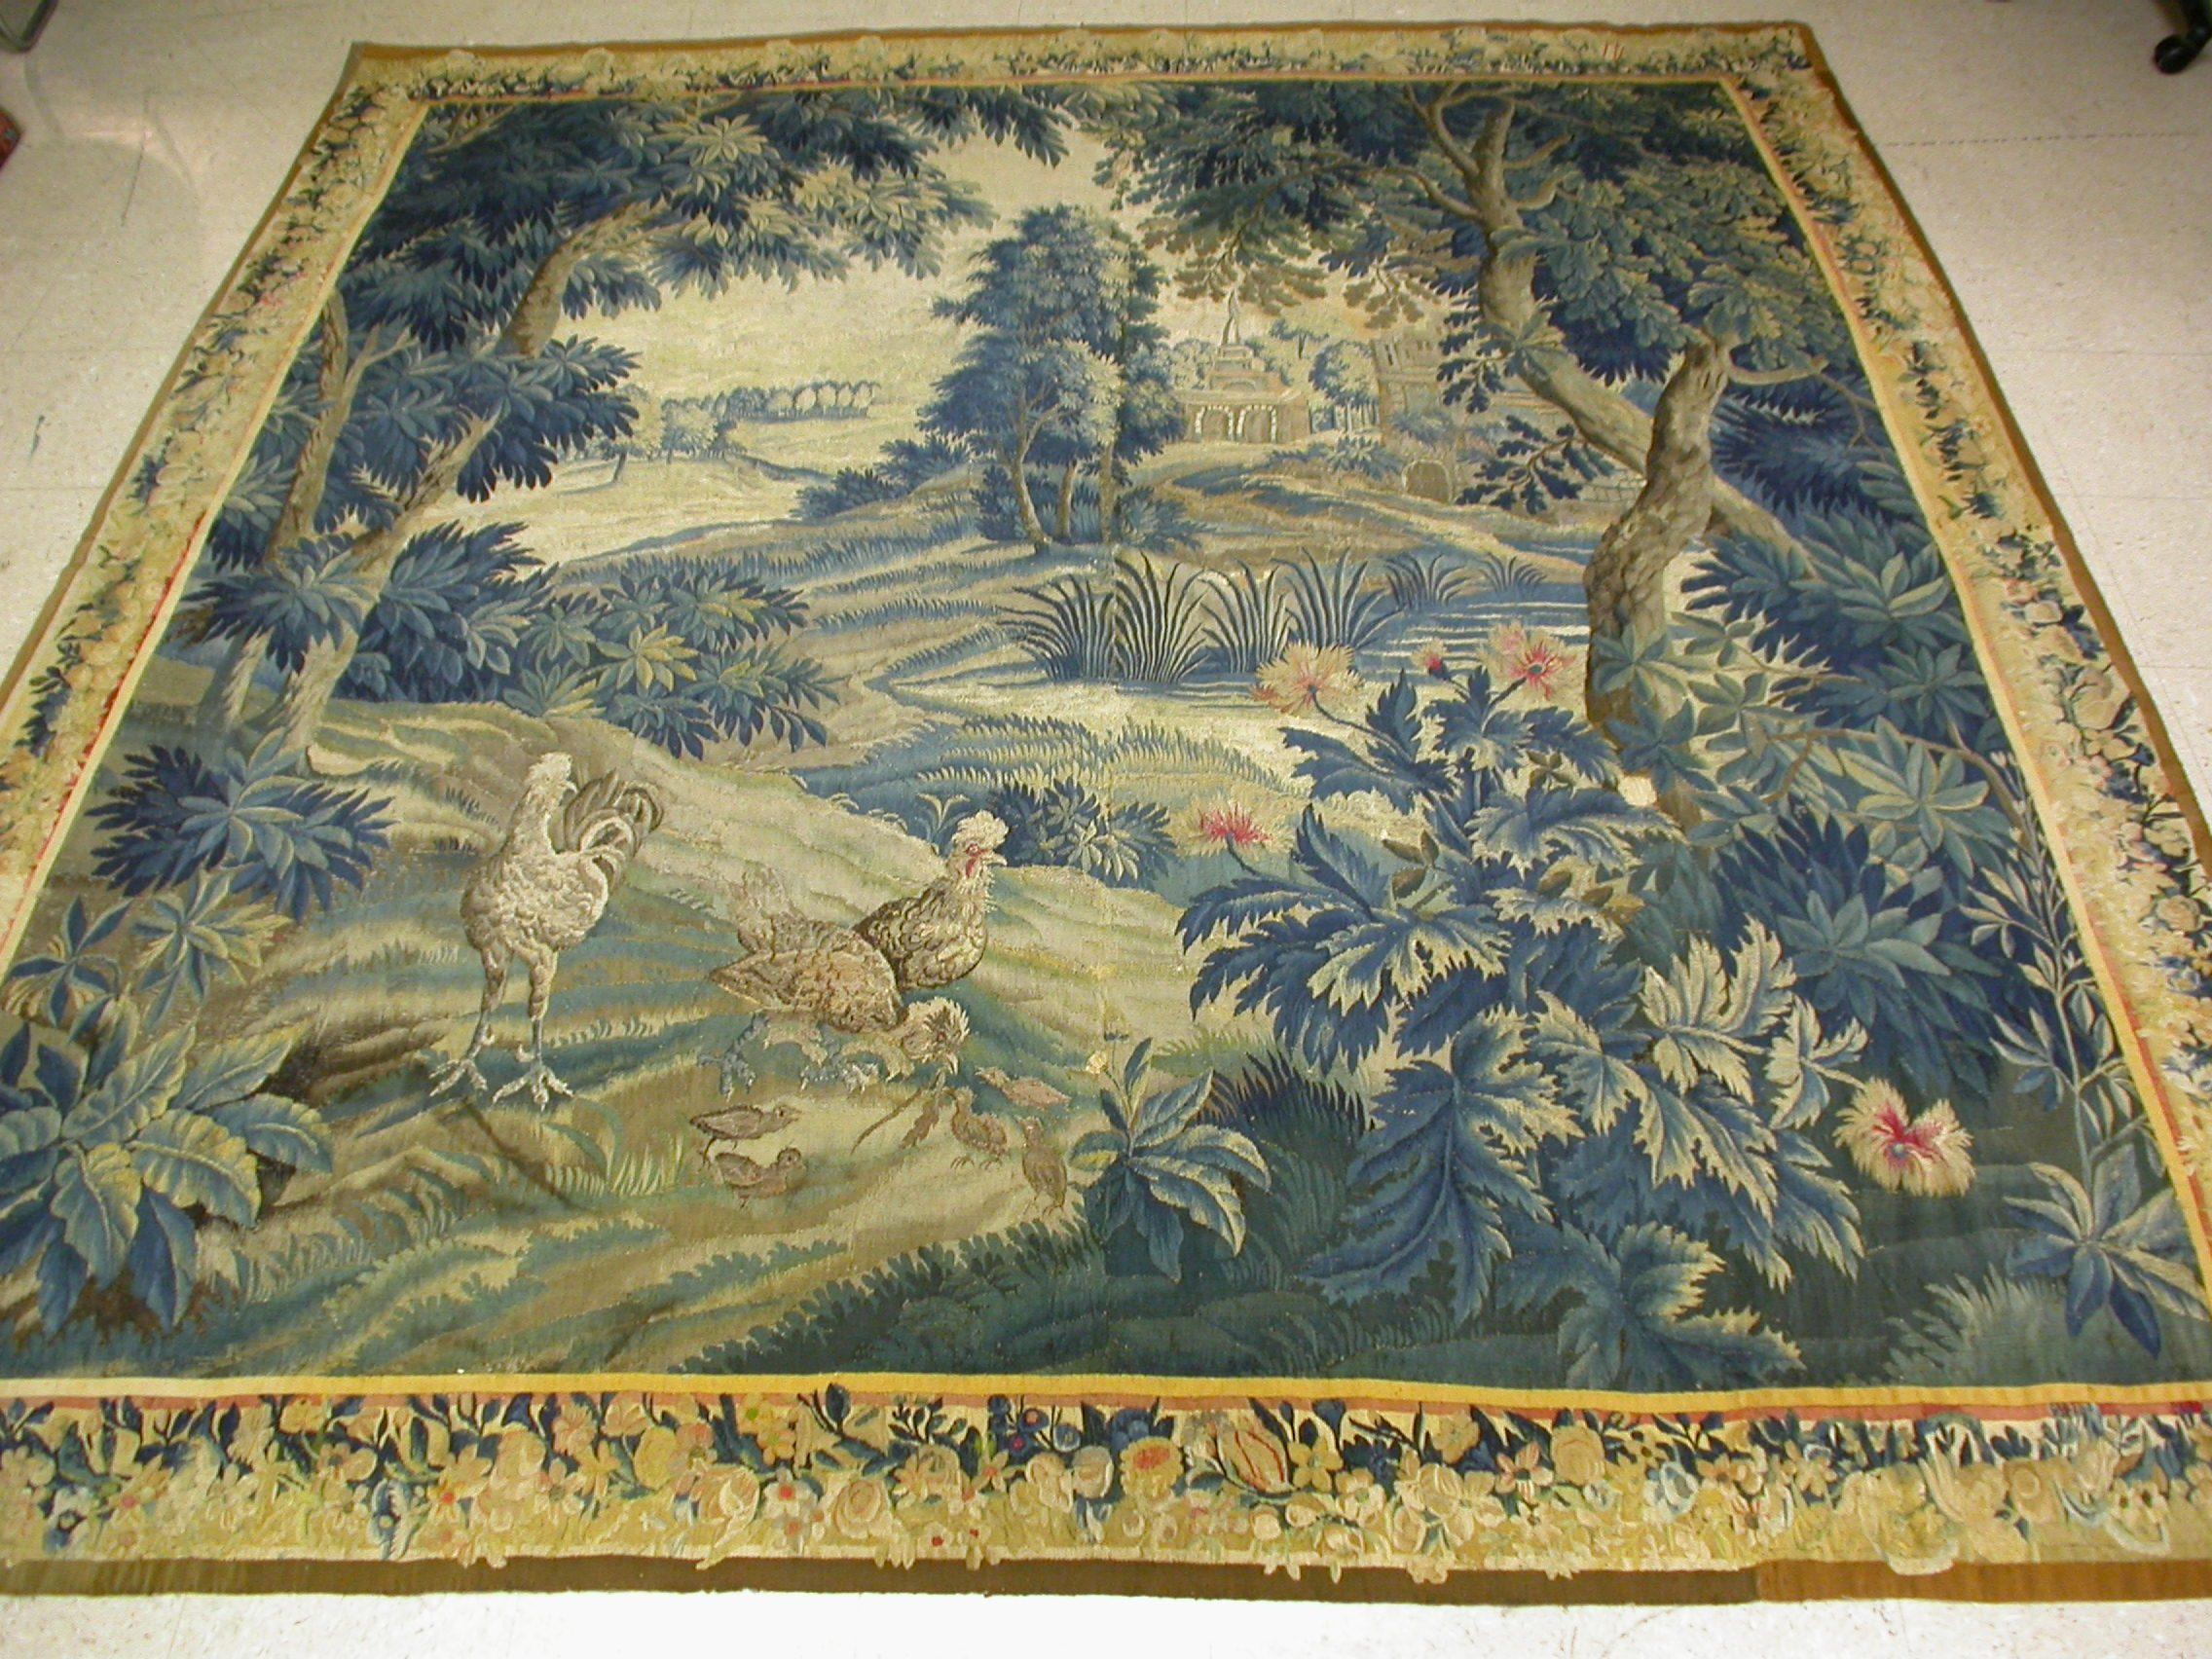 Hand-Woven Antique 18th Square Century Flemish Verdure Green Landscape Tapestry with Birds For Sale